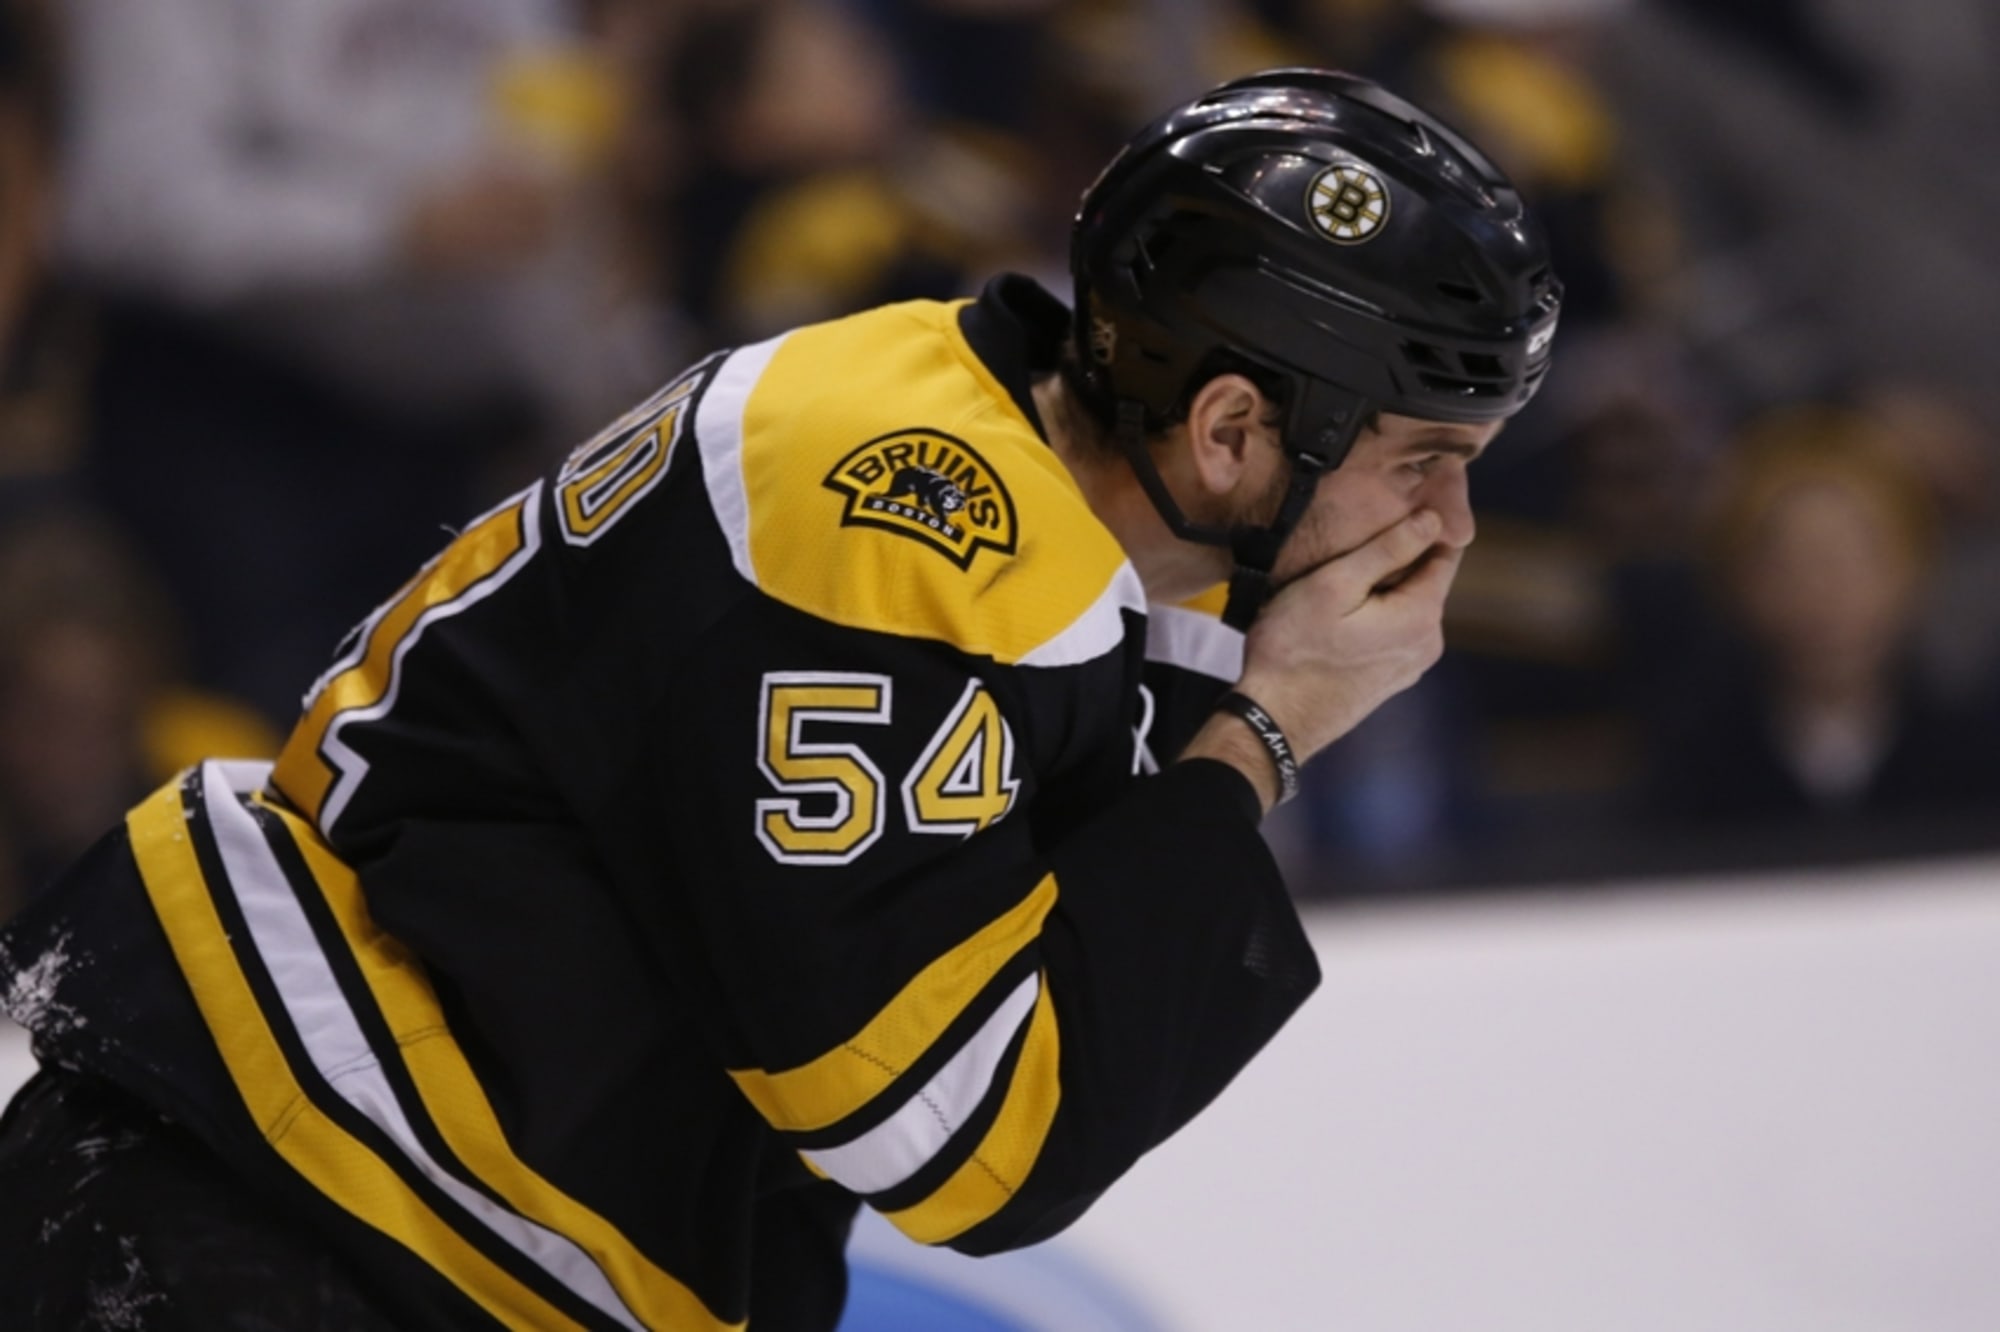 VIDEO: One-on-one with Adam McQuaid of the Boston Bruins - The